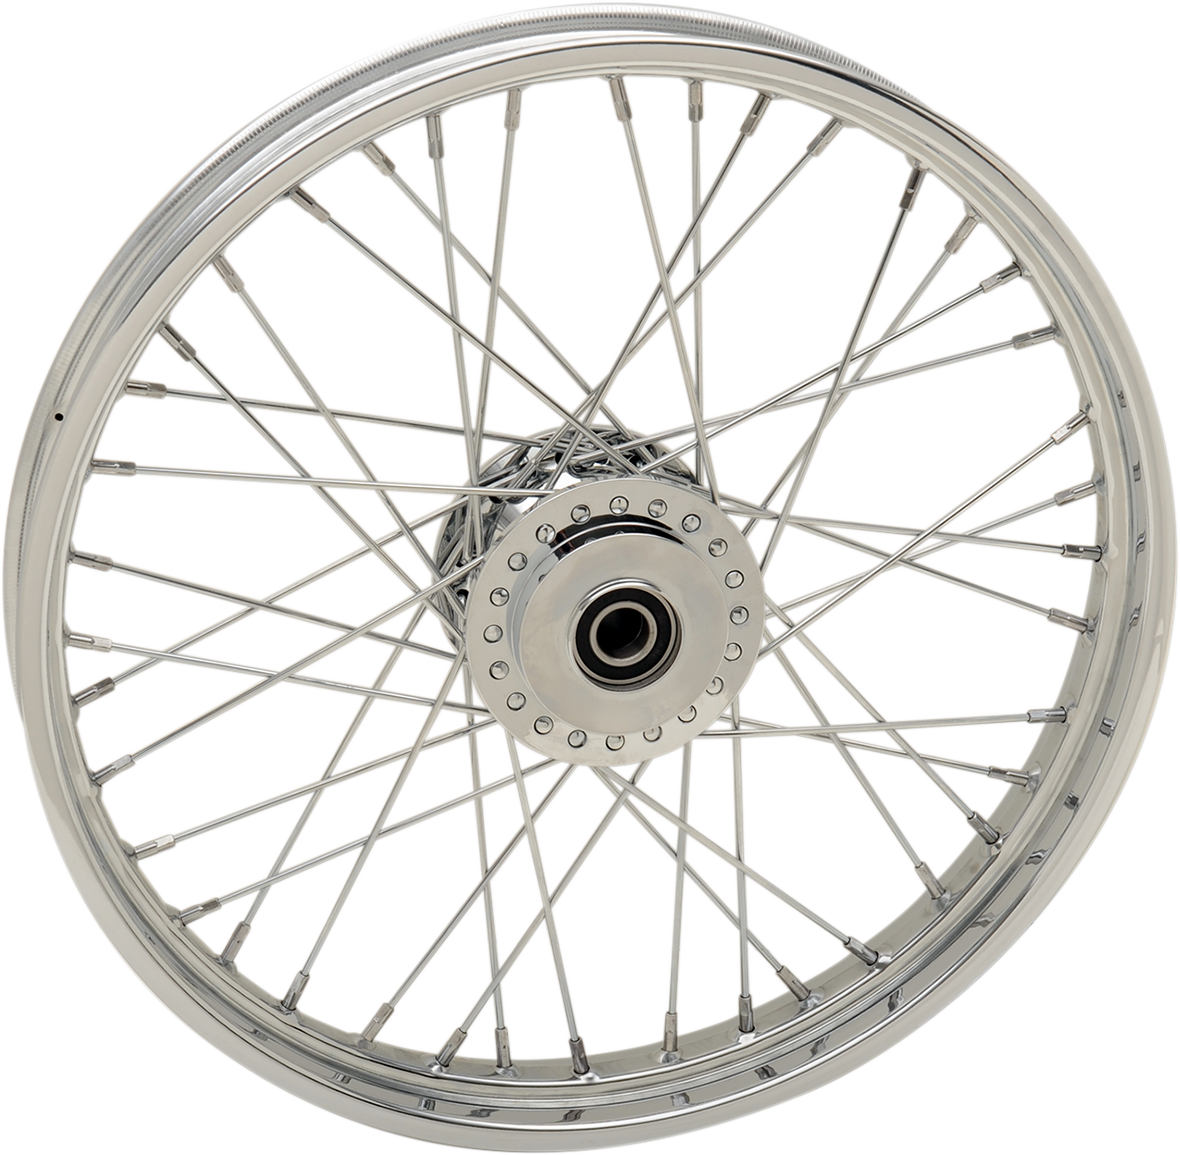 DRAG SPECIALTIES Front Wheel - Single Disc/No ABS - Chrome - 21"x2.15" - '08+ XL FITS 08-20 MODELS 64424